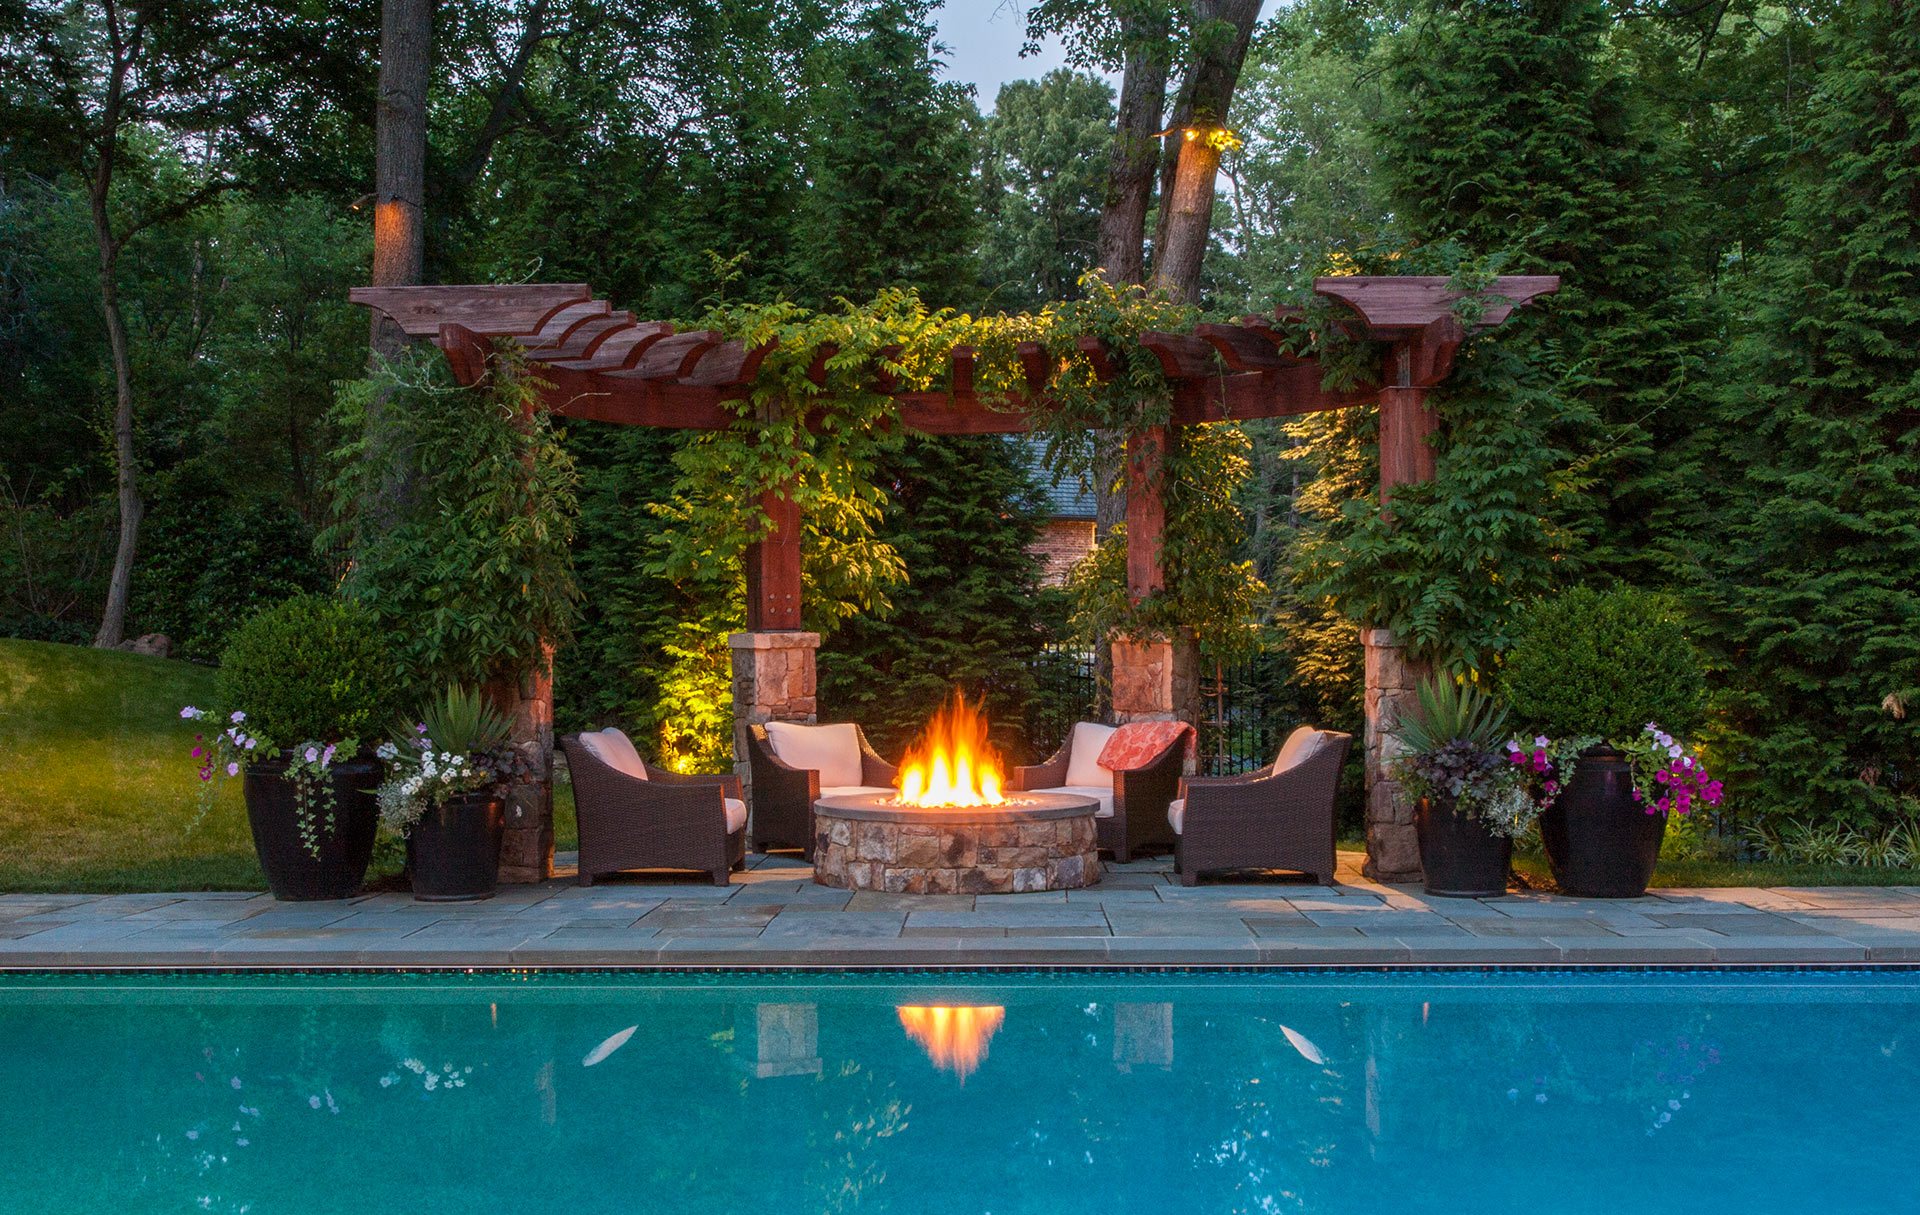 Pool and a gazebo with a fireplace surrounded by lush trees.